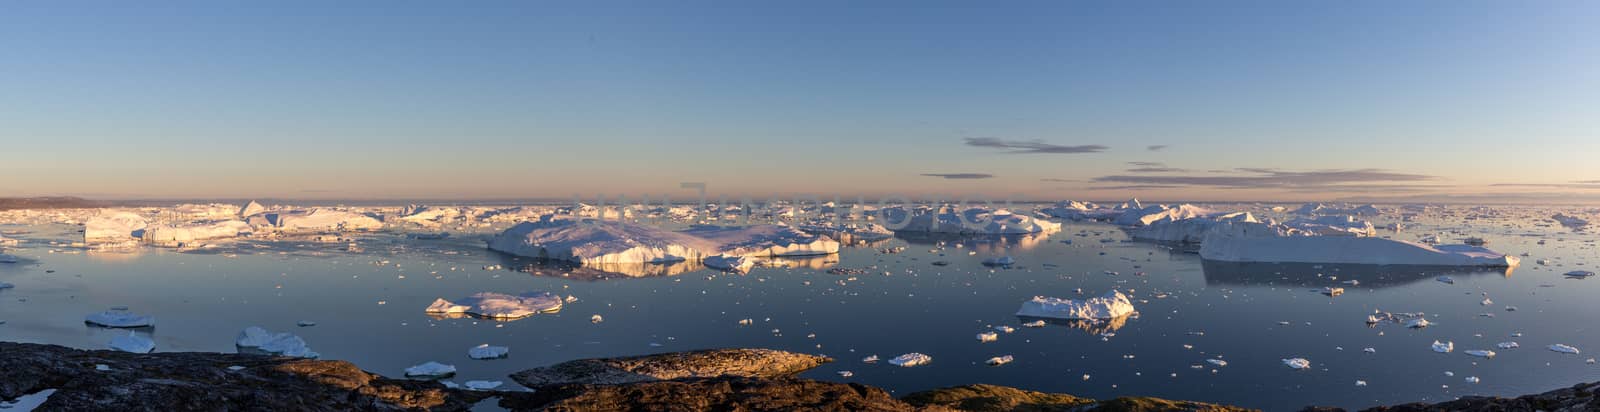 Ilulissat, Greenland - July 7, 2018: Panoramic view of the Ilulissat Icefjord during midnight sun. Ilulissat Icefjord was declared a UNESCO World Heritage Site in 2004.